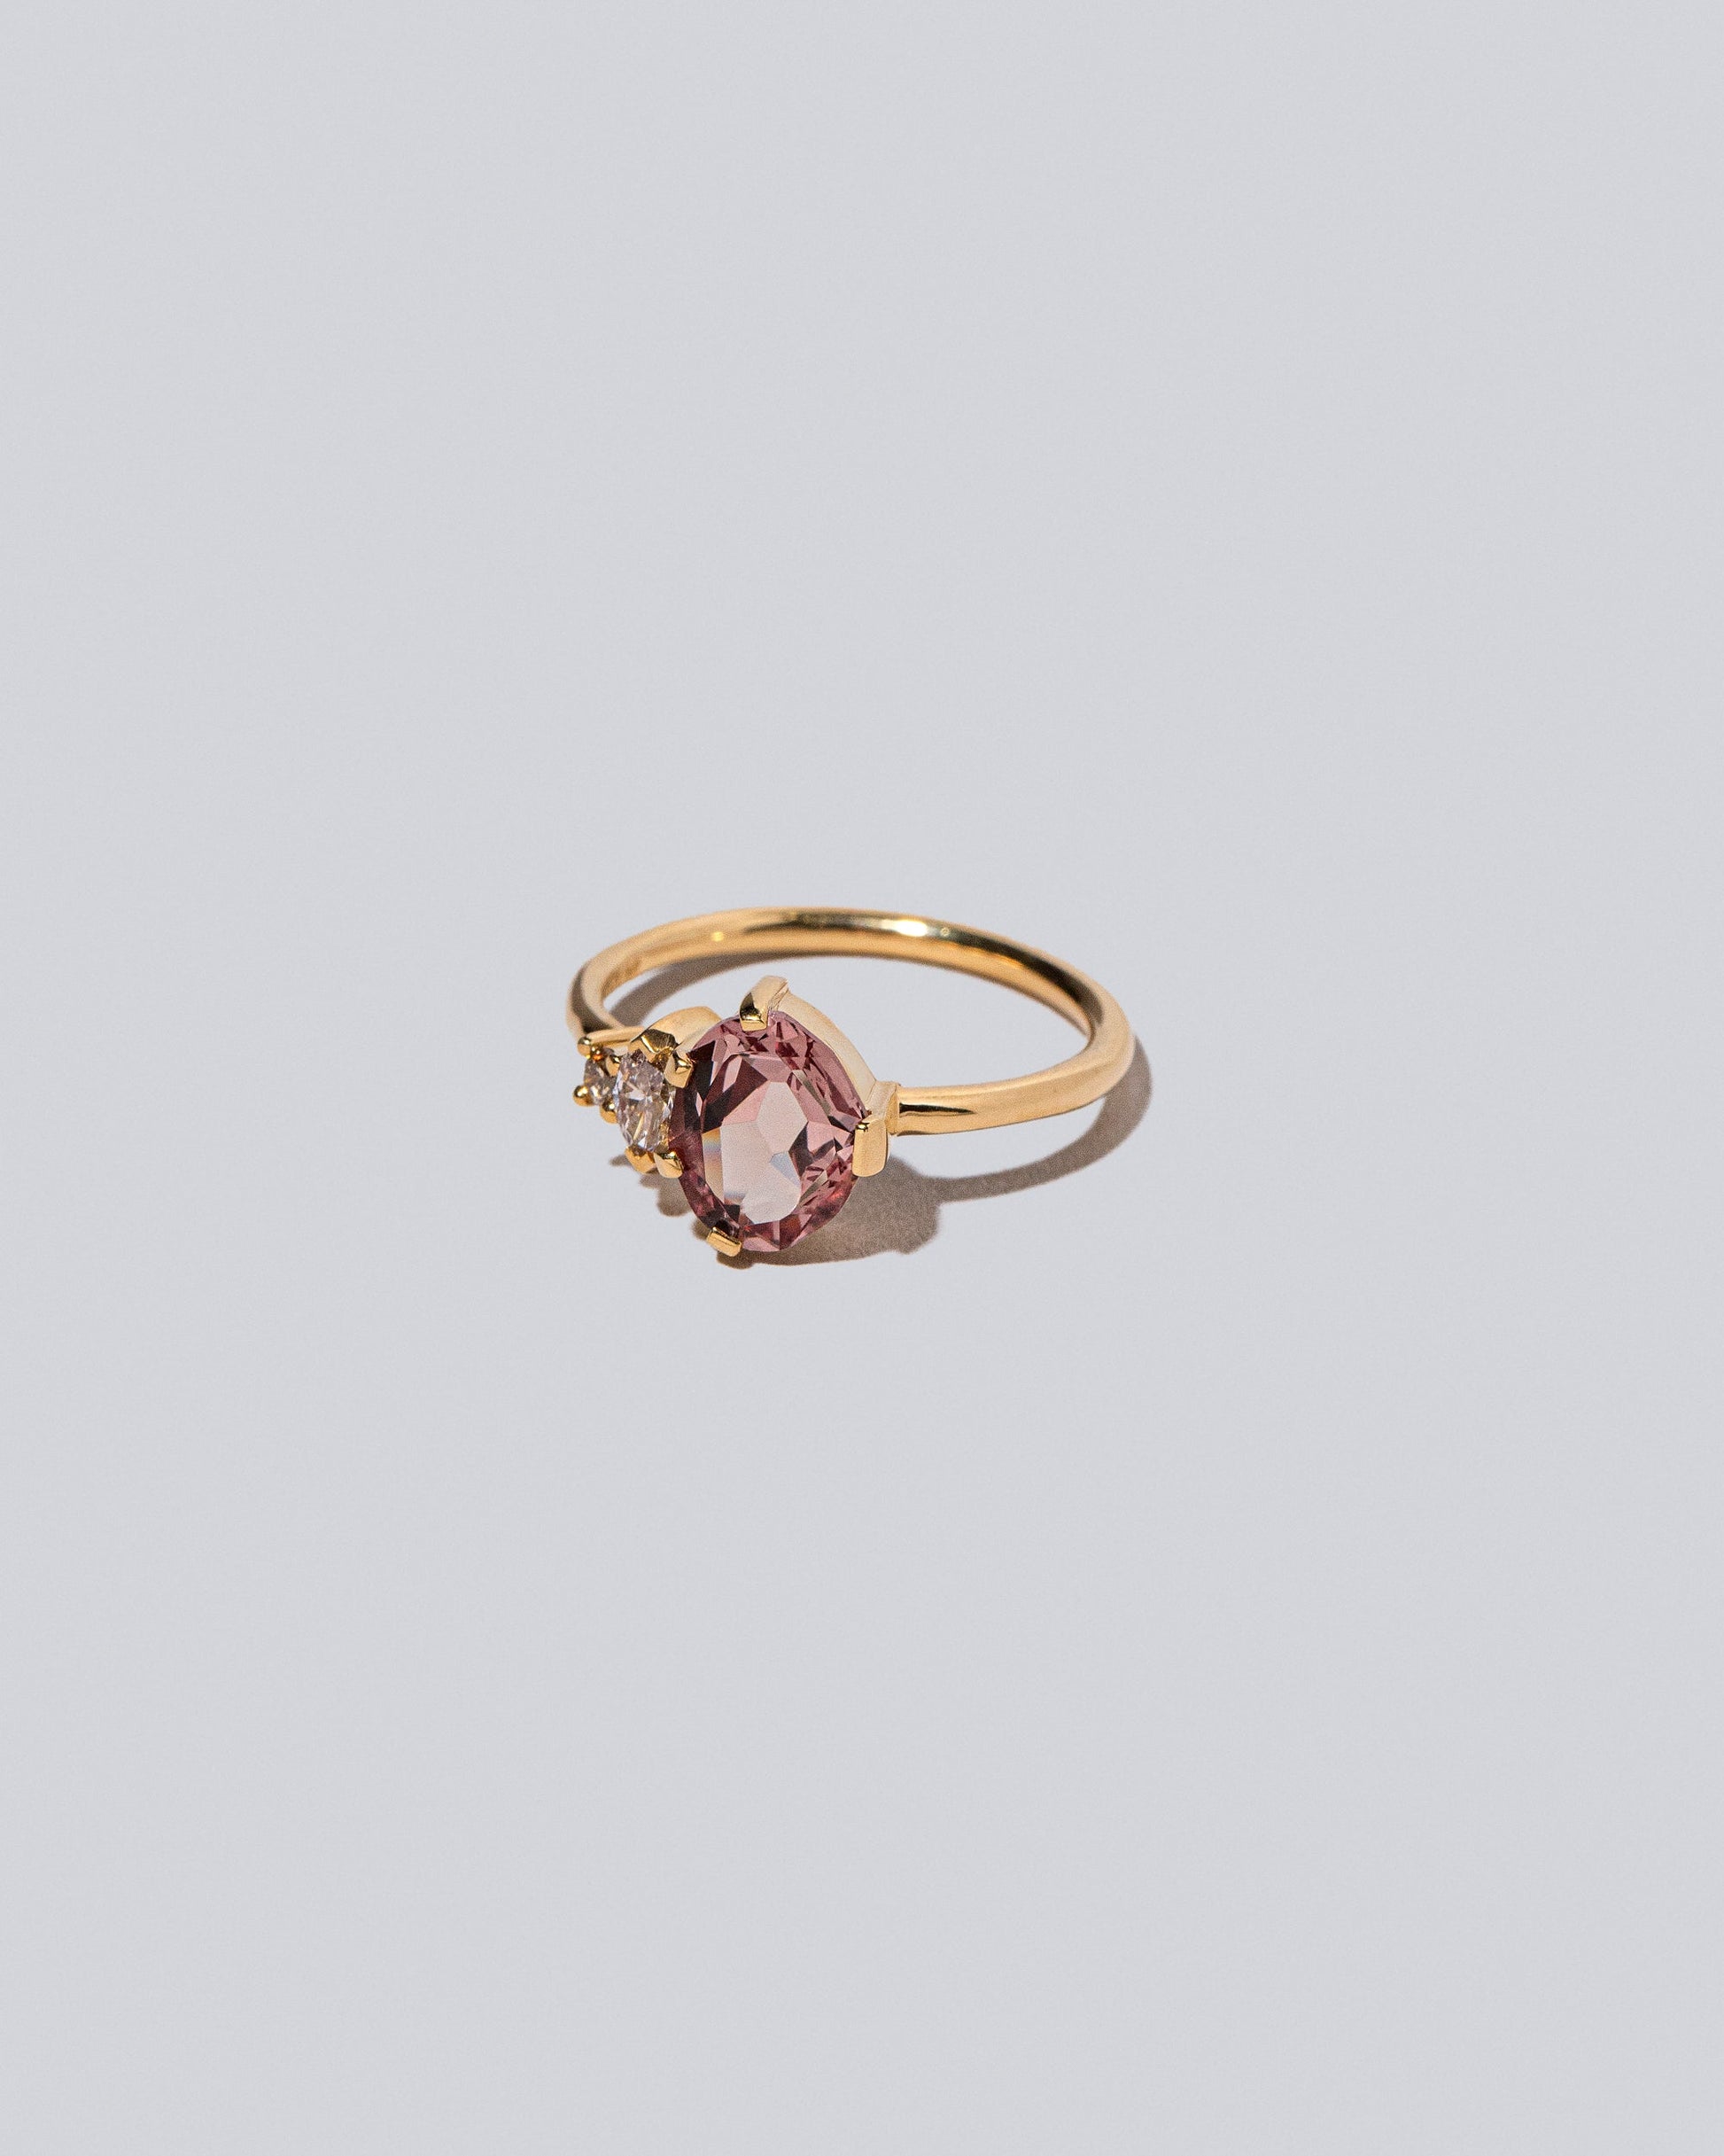 Product photo of Wren Ring on a light color background 